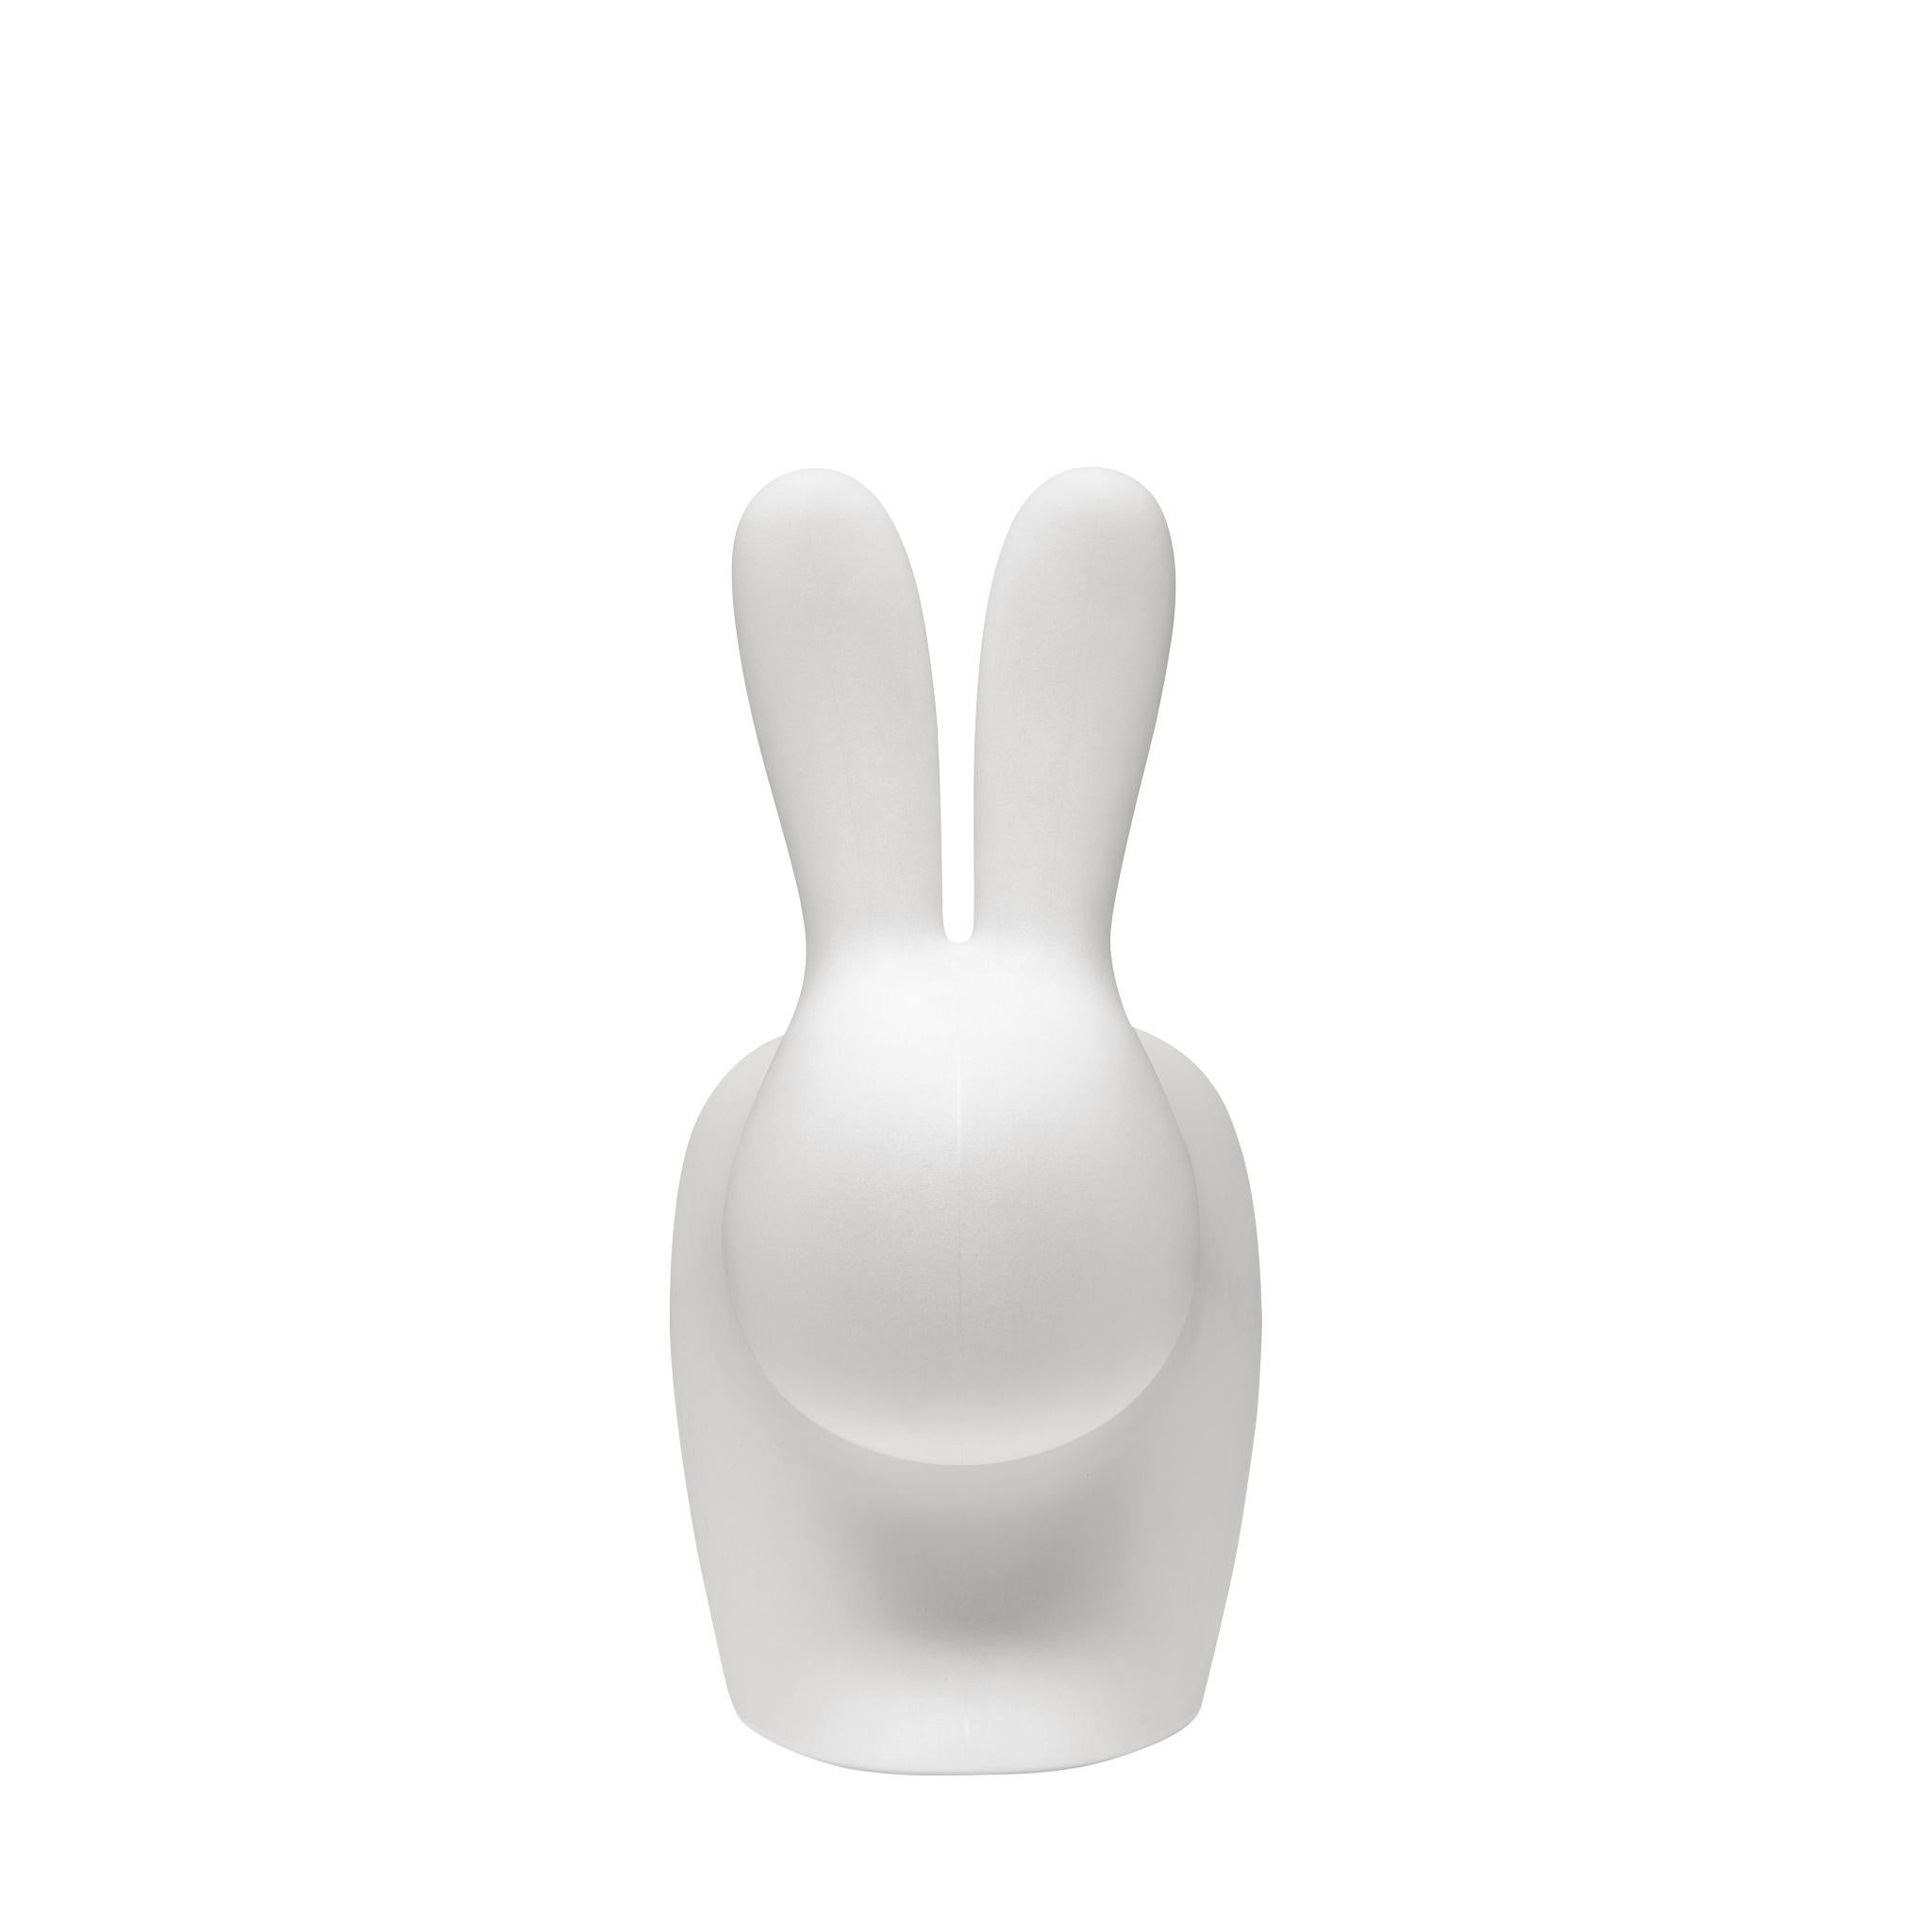 Rabbit chair goes bright! Designed by Stefano Giovanonni and immediately become a pop icon, it can both be used as a light source and a chair. Sit by leaning against the ears or ride it and rest your forearms on its ears. The most authentic Qeeboo’s